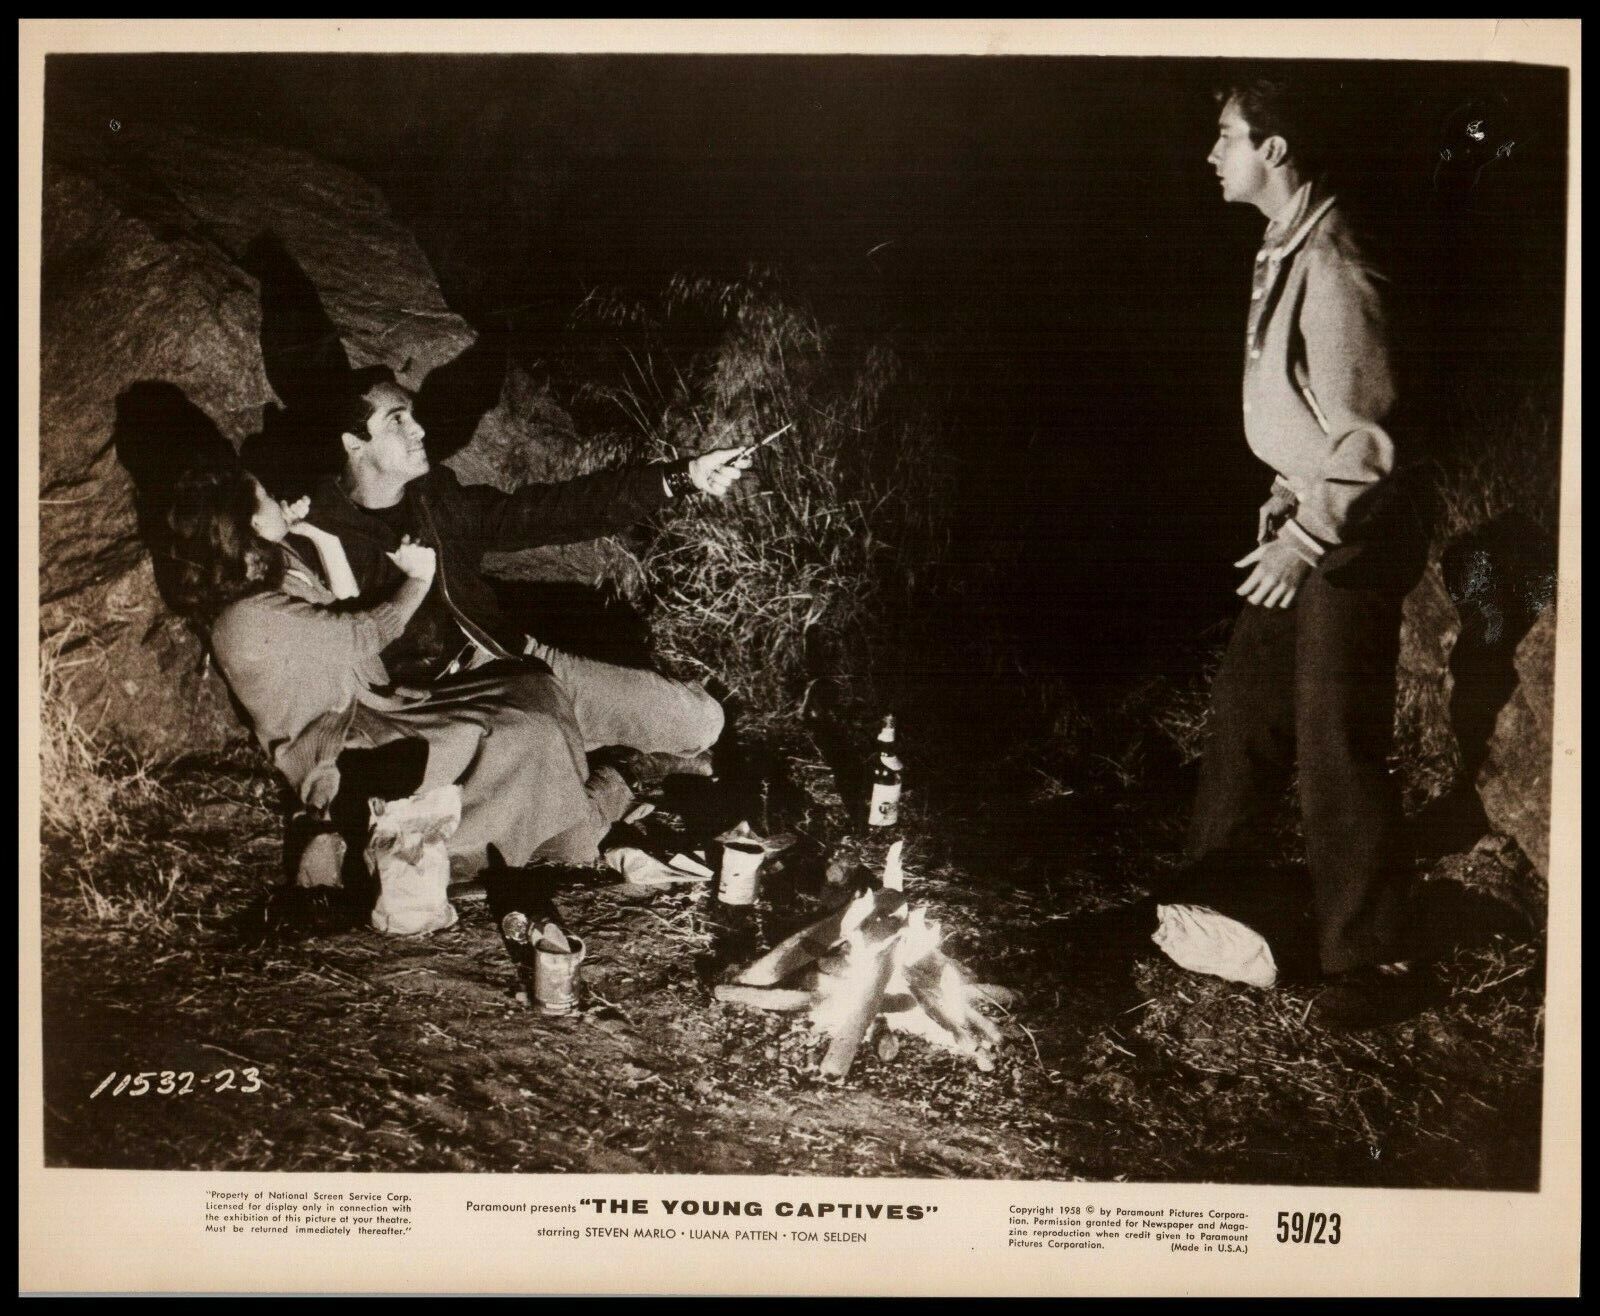 Steven Marlo + Tom Selden + Luana Patten in The Young Captives (1958) PHOTO M 66